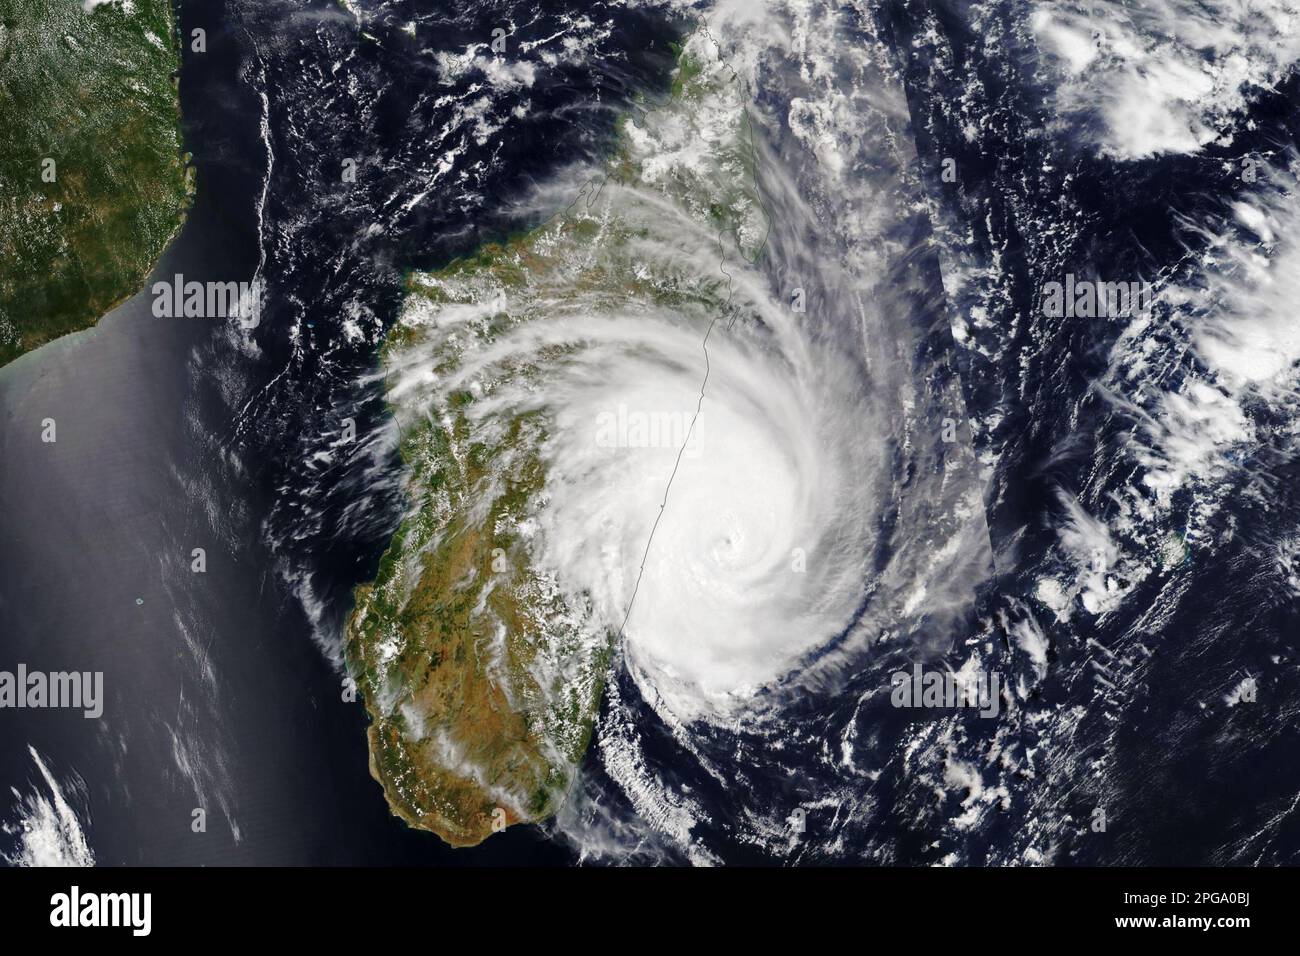 After traveling for 15 days across the Indian Ocean, Tropical Cyclone Freddy made landfall on the east coast of Madagascar on the evening of February 21, 2023. This image shows Freddy just east of Madagascar at 1:50 p.m. local time (10:50 Universal Time) on February 21. It was acquired by the Visible Infrared Imaging Radiometer Suite (VIIRS) on the NOAA-20 satellite. As Freddy made landfall north of Mananjary around 7:20 p.m. local time, its winds measured about 130 kilometers (80 miles) per hour, but precise wind speeds at landfall were yet to be confirmed. The coastal town of Mananjary, home Stock Photo